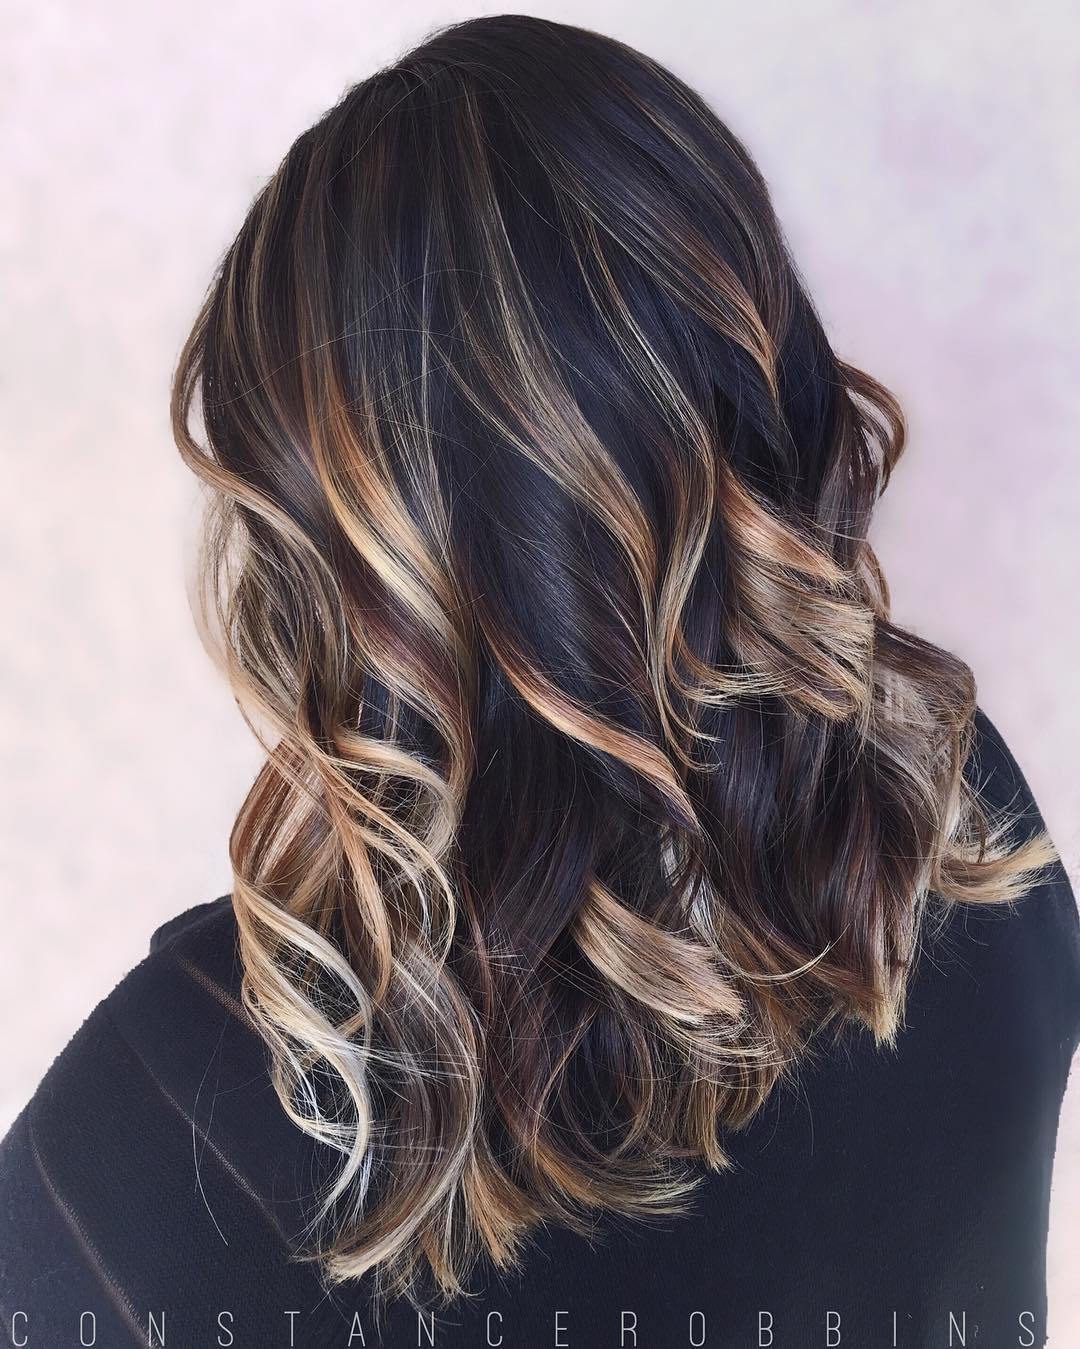 Black Hair With Blonde Highlights For 2020 - Pretty Designs